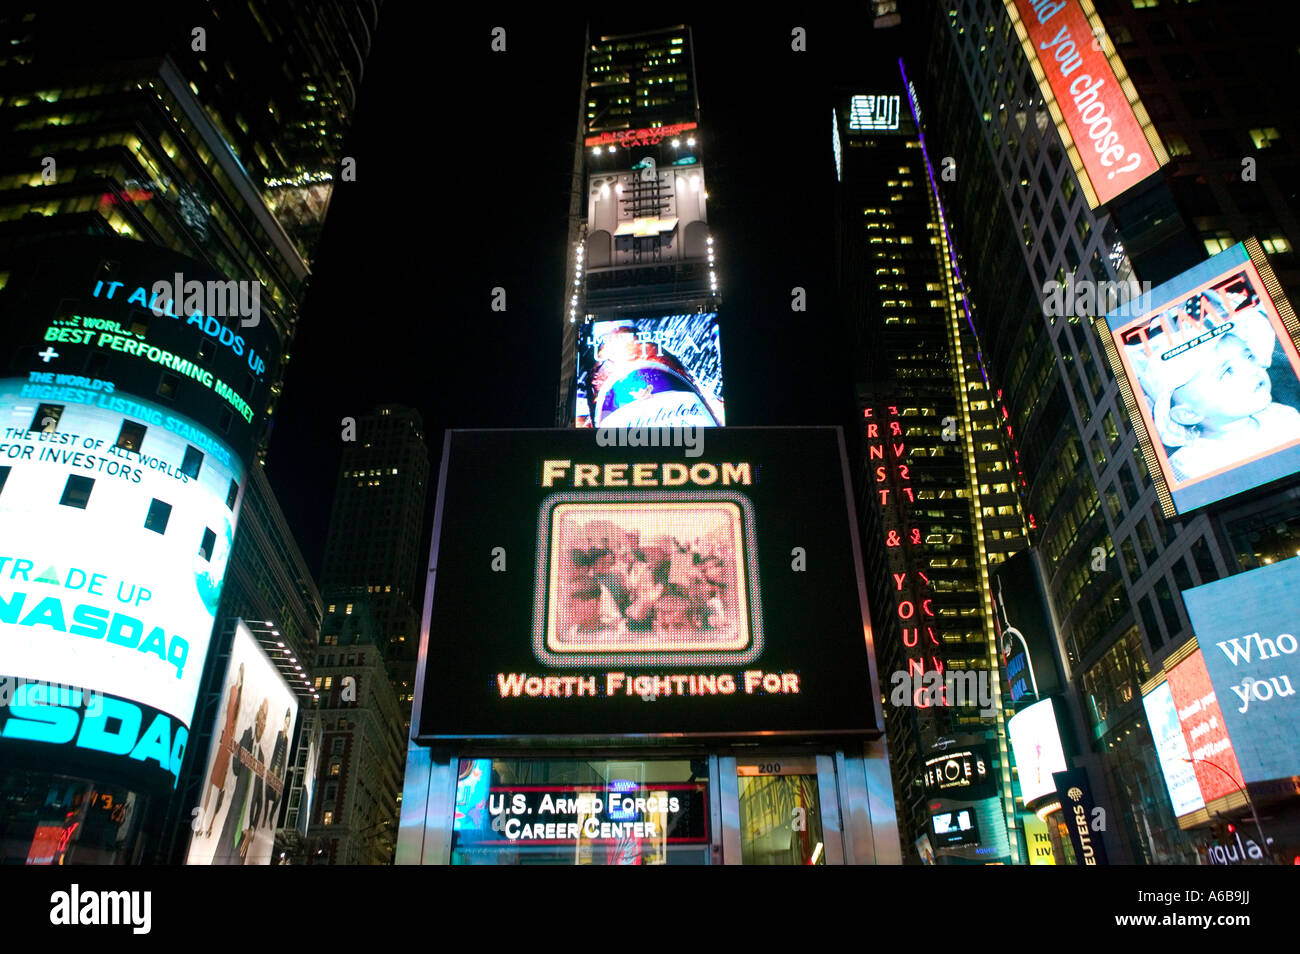 US Army recruitment advertisement on Times Square in New York City USA Dec 2006 Stock Photo